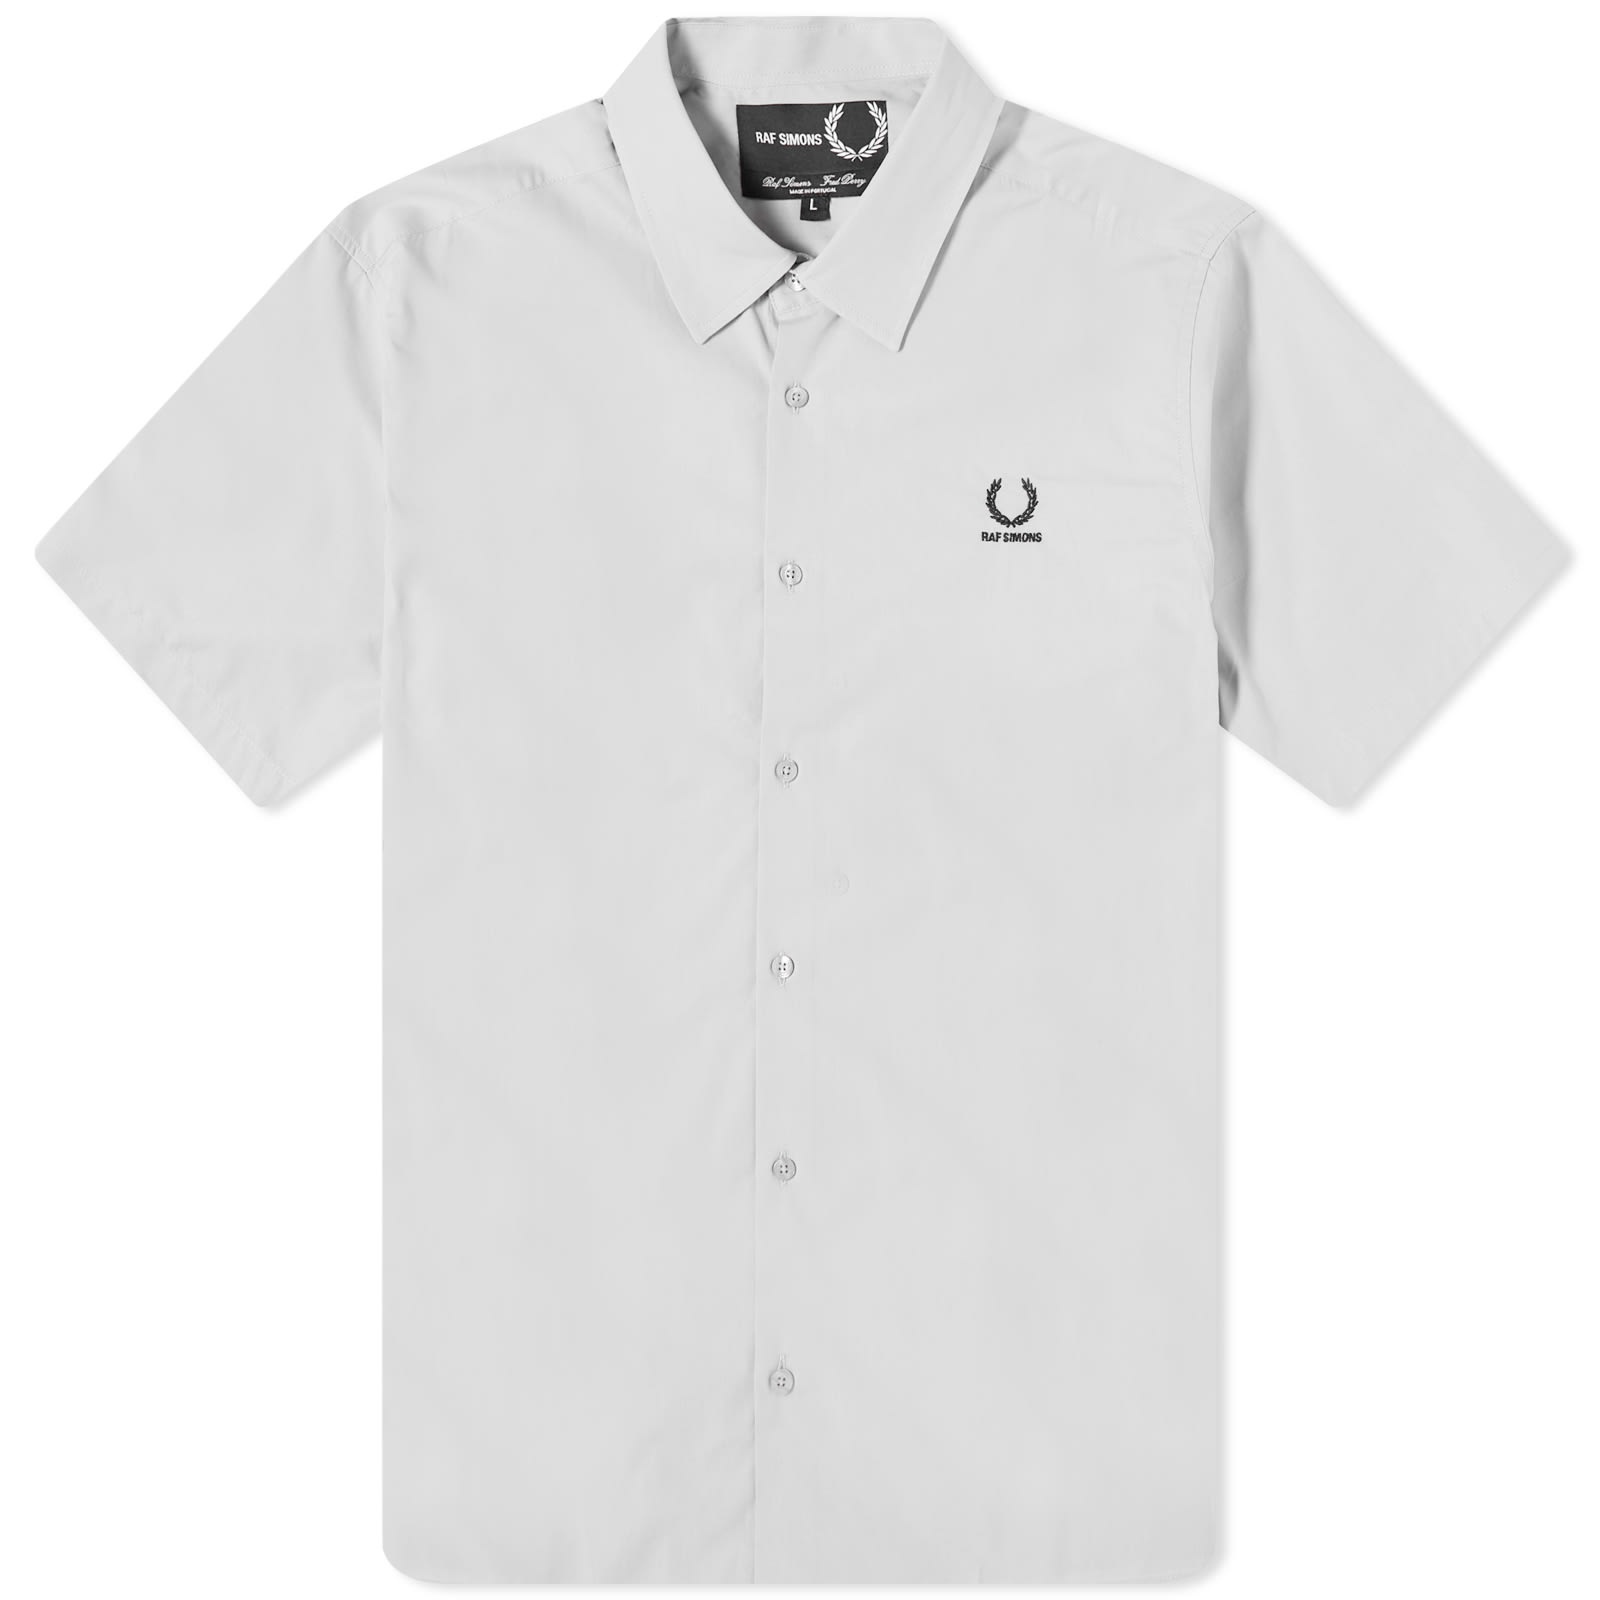 Fred Perry x Raf Simons Embroidered Short Sleeve Shirt - 1